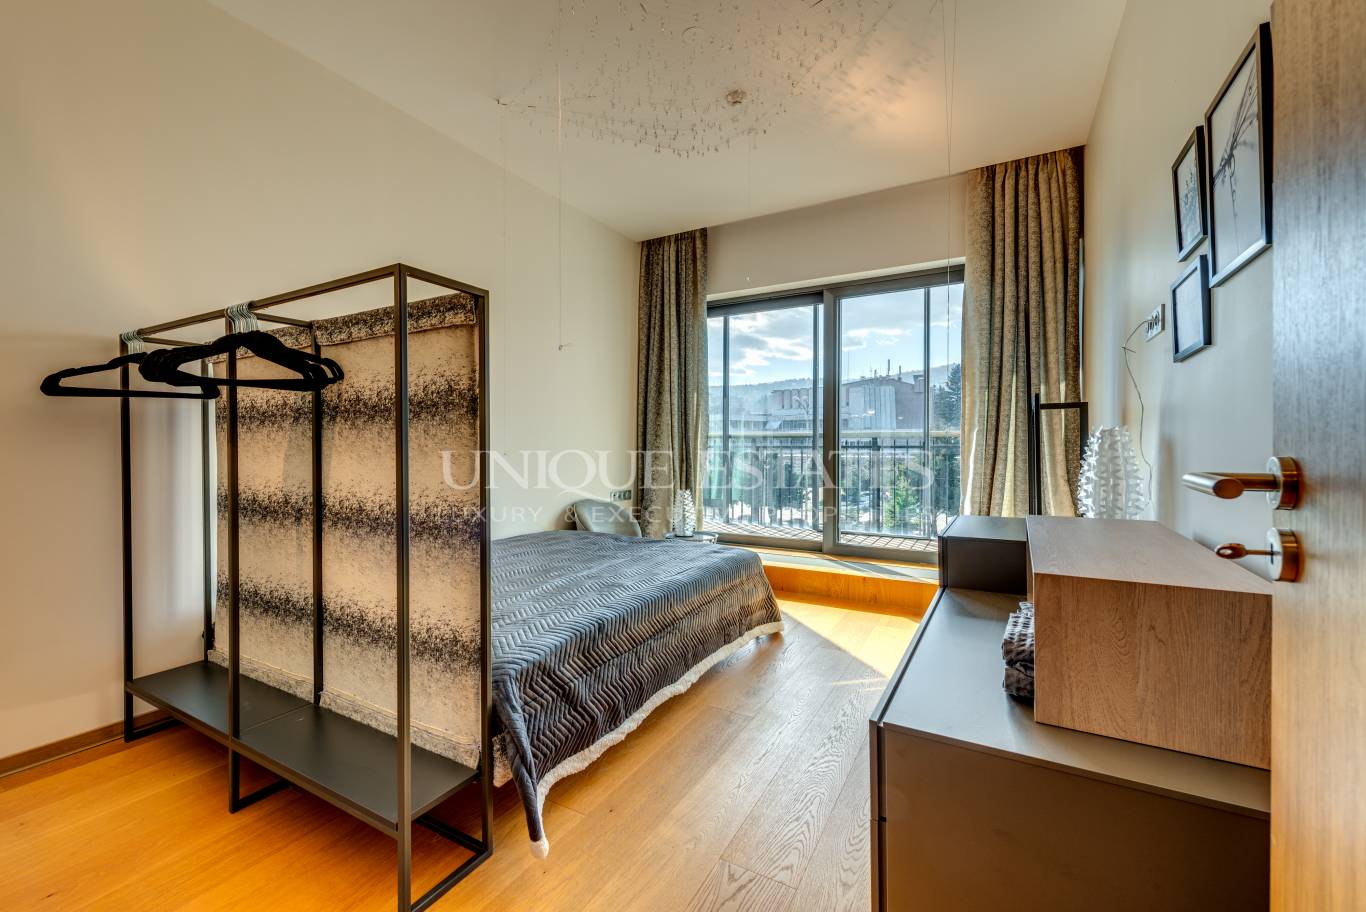 Apartment for sale in Sofia, Pancharevo with listing ID: K14508 - image 19